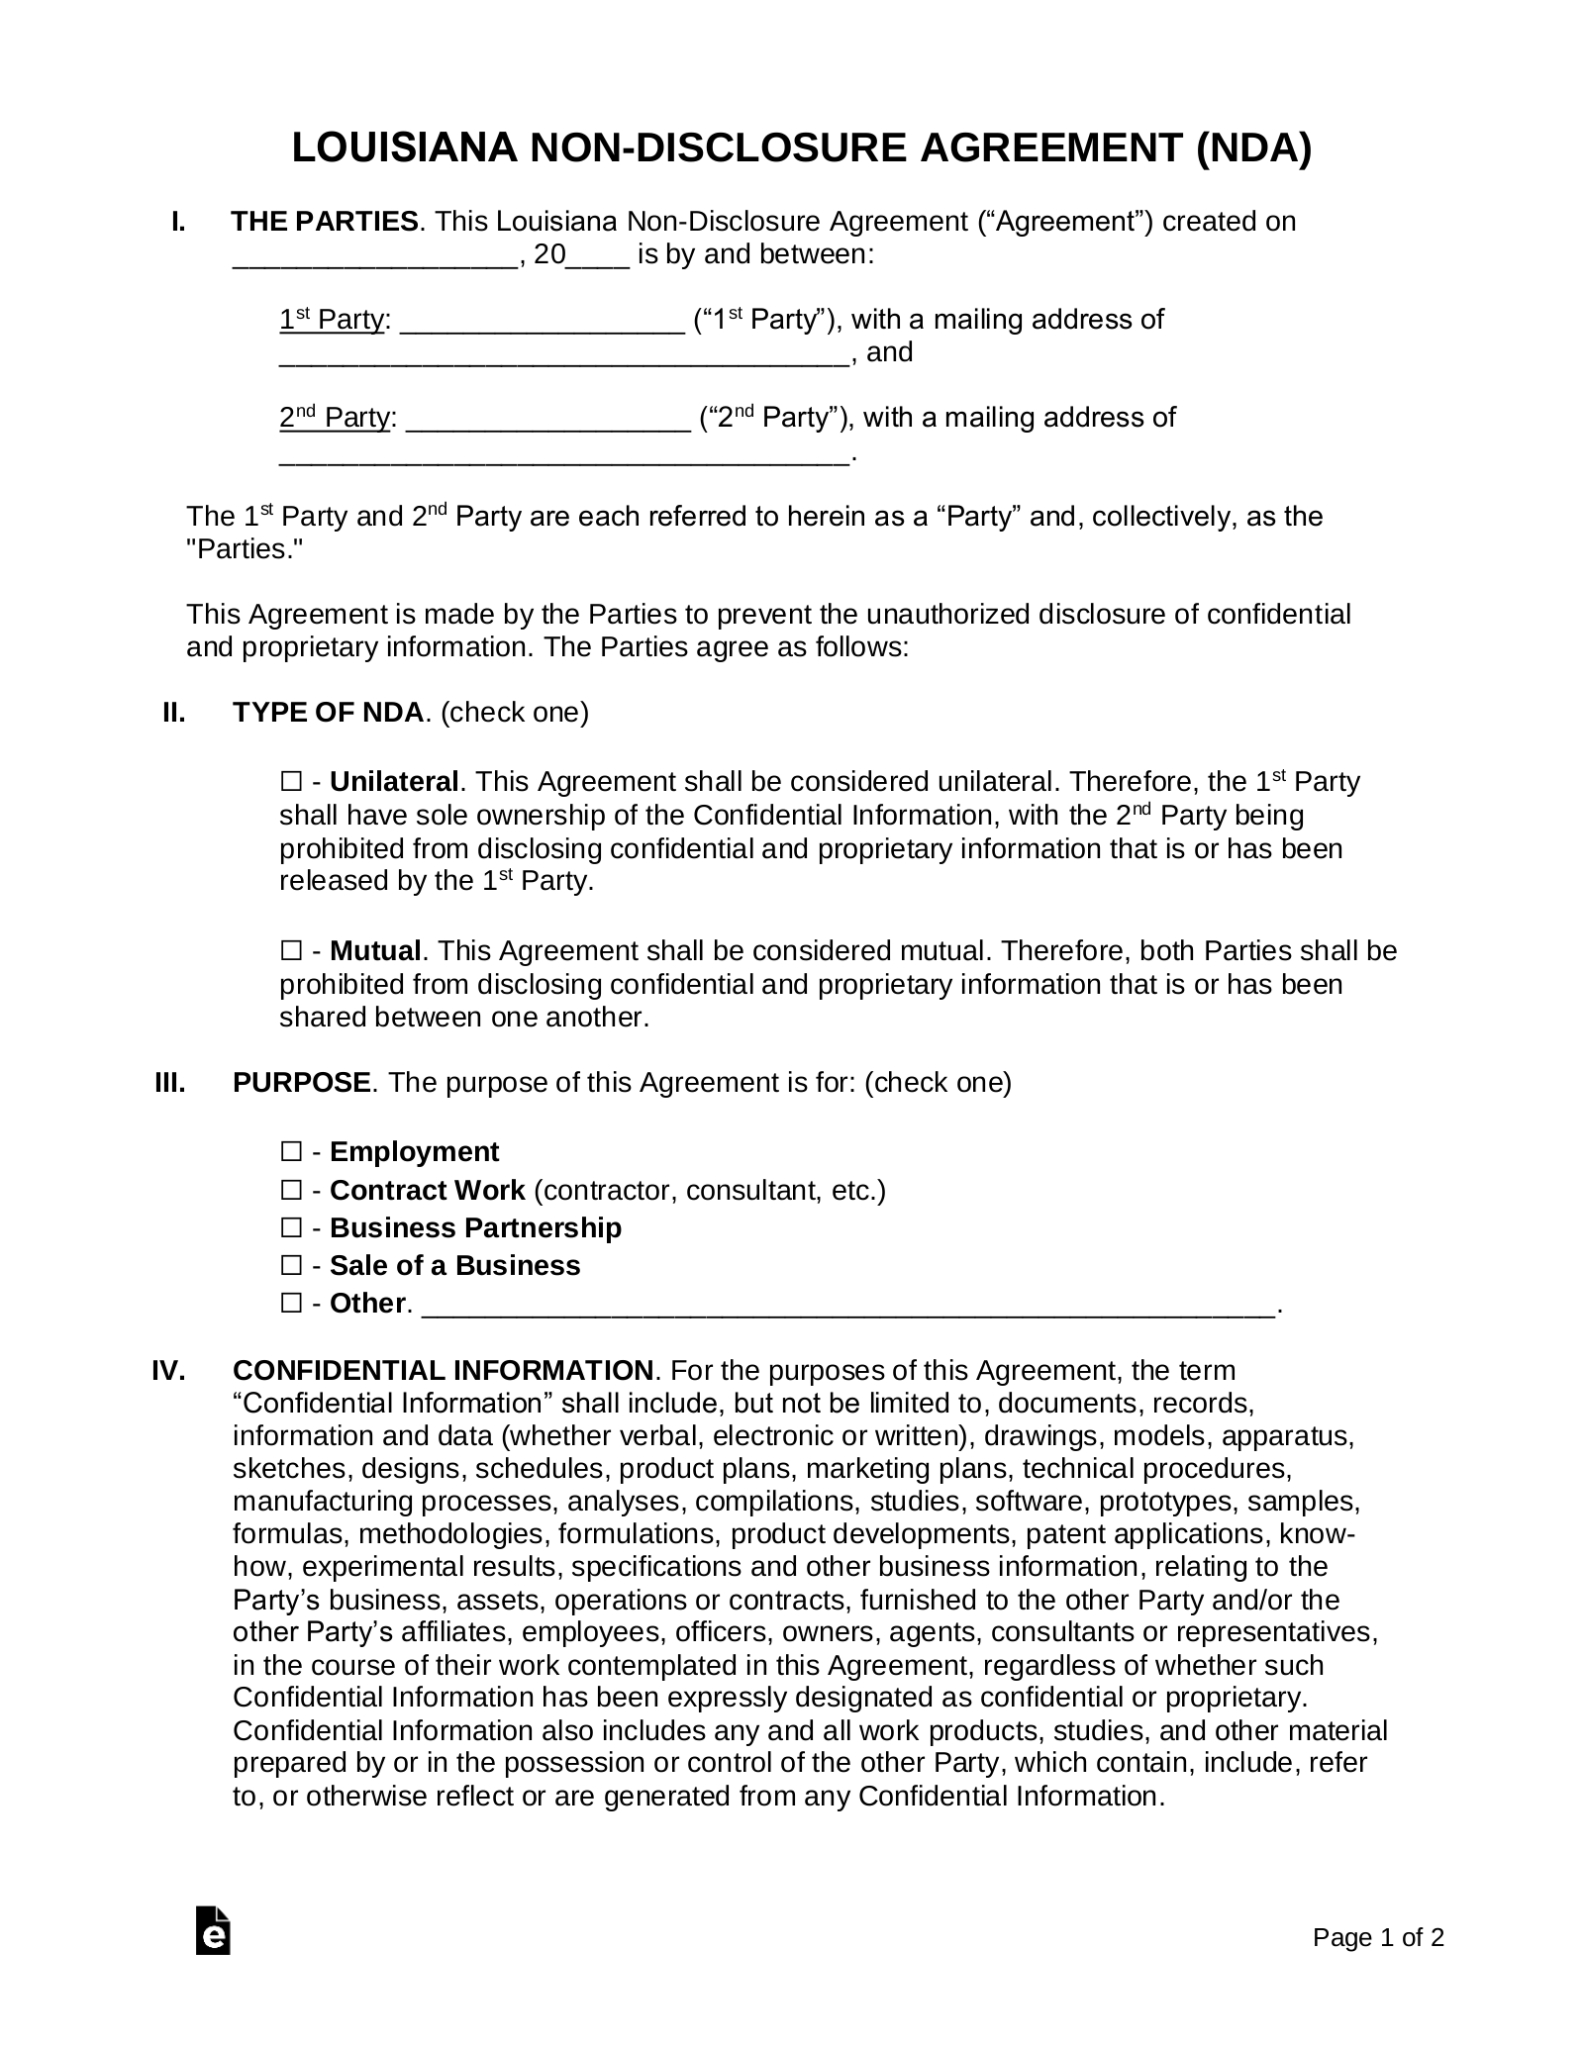 Louisiana Non Disclosure Agreement (Nda) Template – Eforms With Regard To Unilateral Non Disclosure Agreement Template